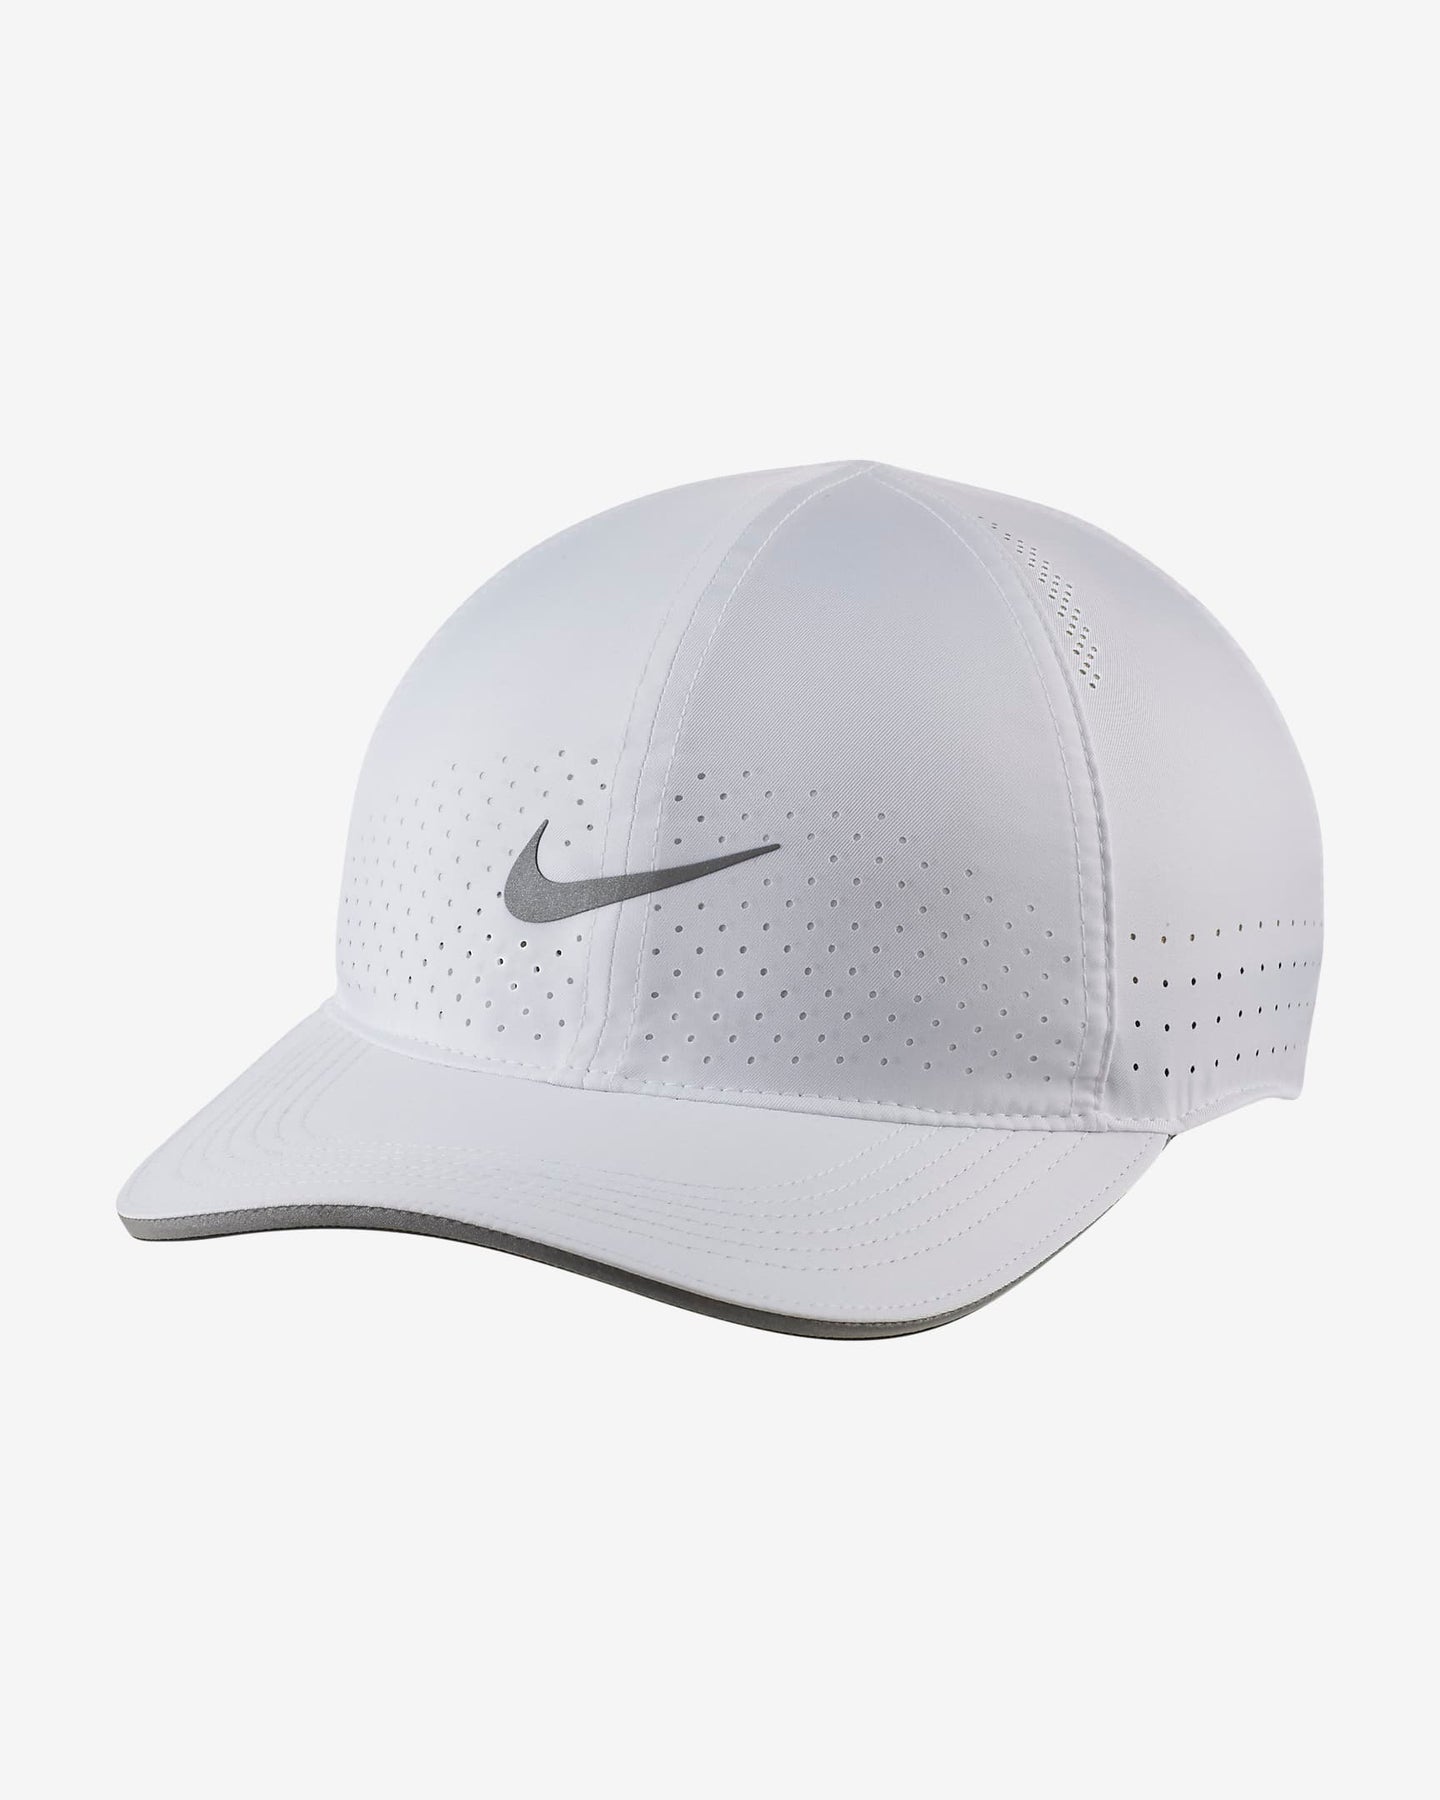 Clearance Nike Dri-FIT Aerobill Featherlight is fashion in United States